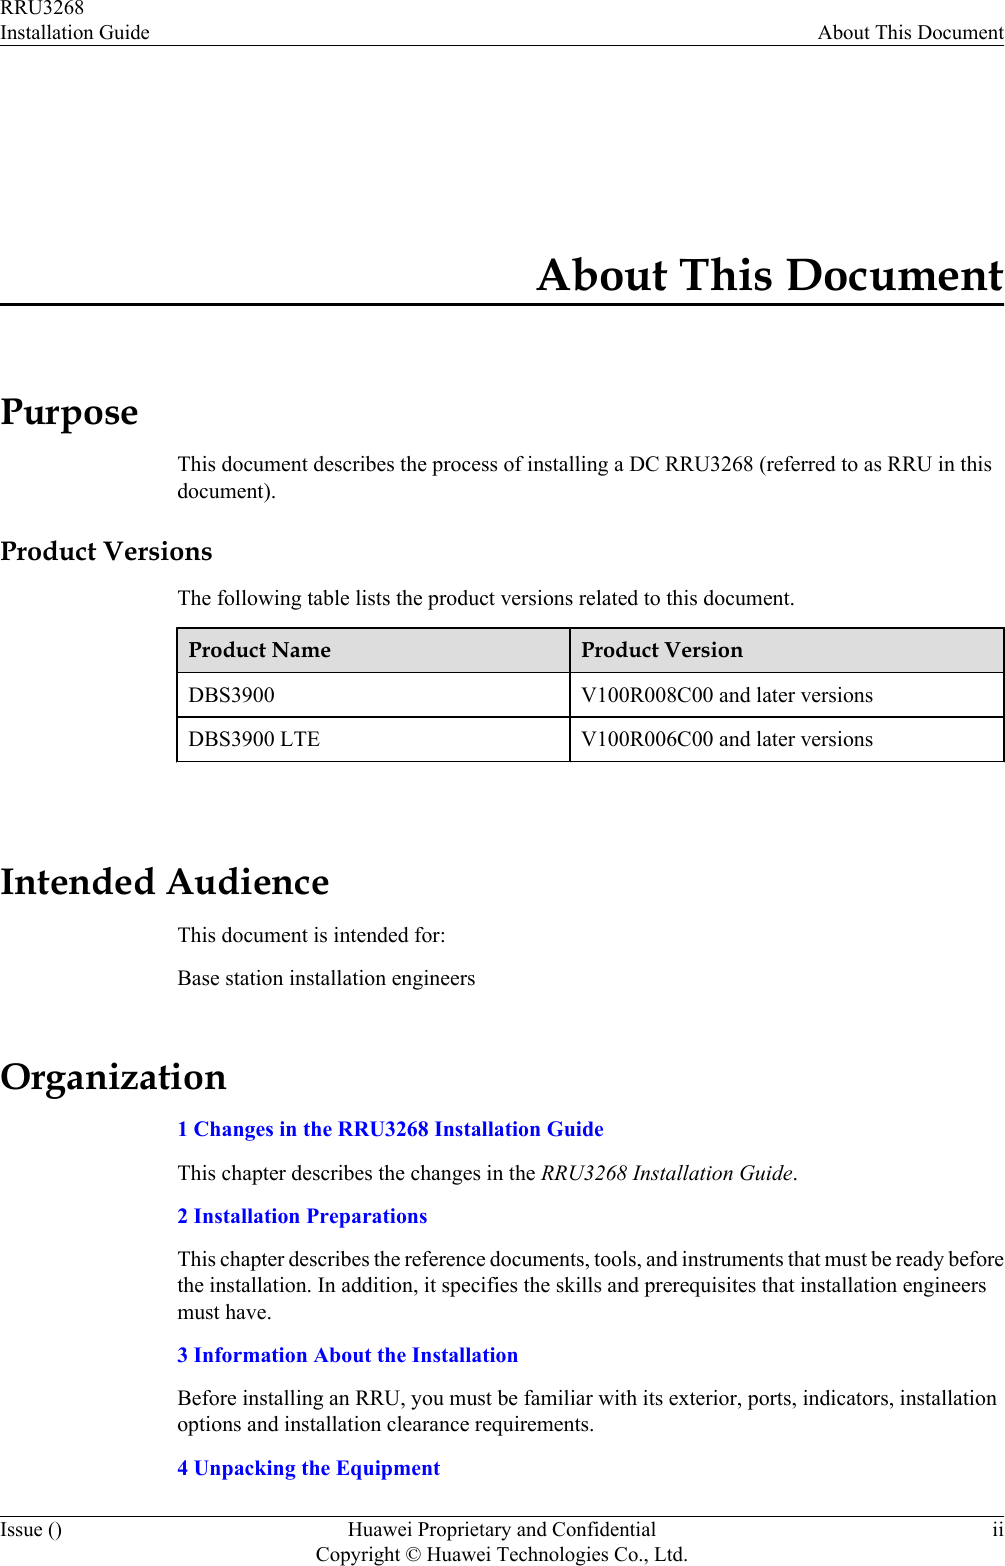 About This DocumentPurposeThis document describes the process of installing a DC RRU3268 (referred to as RRU in thisdocument).Product VersionsThe following table lists the product versions related to this document.Product Name Product VersionDBS3900 V100R008C00 and later versionsDBS3900 LTE V100R006C00 and later versions Intended AudienceThis document is intended for:Base station installation engineersOrganization1 Changes in the RRU3268 Installation GuideThis chapter describes the changes in the RRU3268 Installation Guide.2 Installation PreparationsThis chapter describes the reference documents, tools, and instruments that must be ready beforethe installation. In addition, it specifies the skills and prerequisites that installation engineersmust have.3 Information About the InstallationBefore installing an RRU, you must be familiar with its exterior, ports, indicators, installationoptions and installation clearance requirements.4 Unpacking the EquipmentRRU3268Installation Guide About This DocumentIssue () Huawei Proprietary and ConfidentialCopyright © Huawei Technologies Co., Ltd.ii